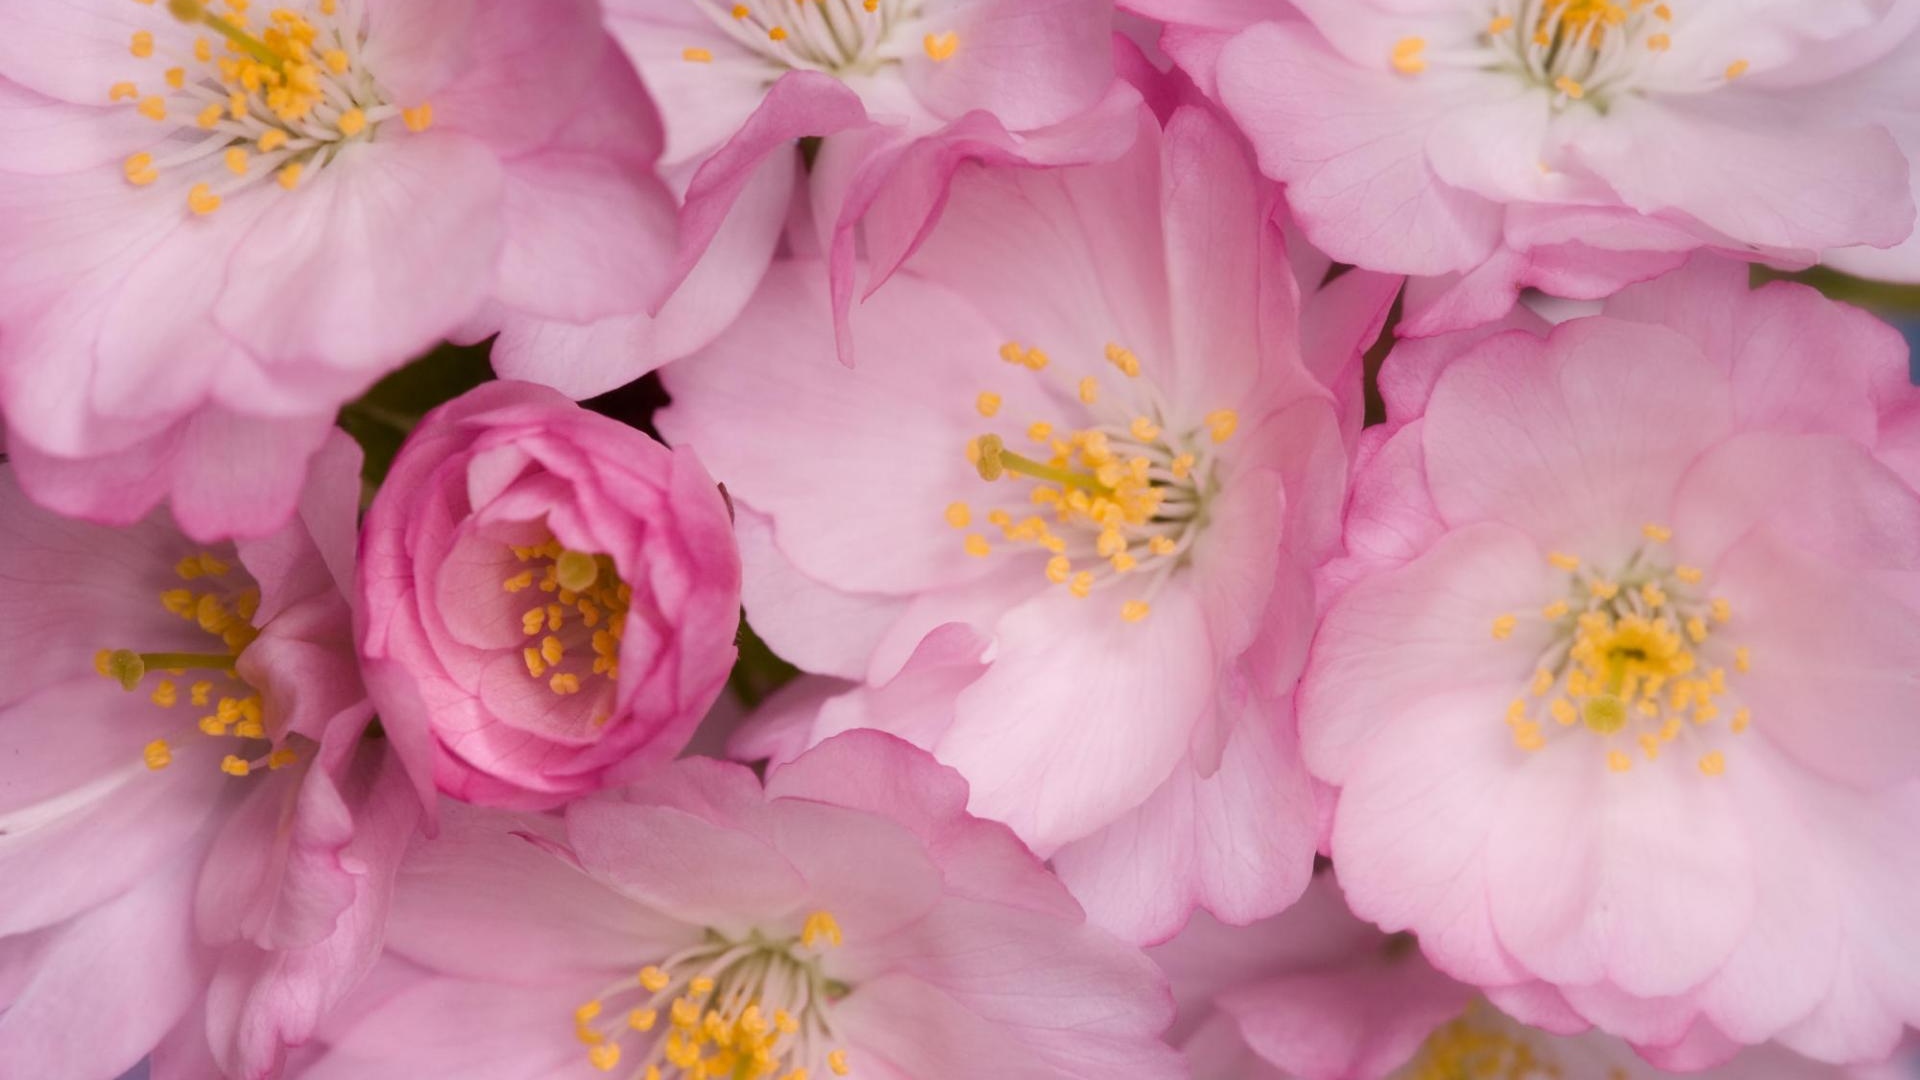 Download Wallpaper 1920x1080 Wild roses, Flowers, Pink, Yellow ...